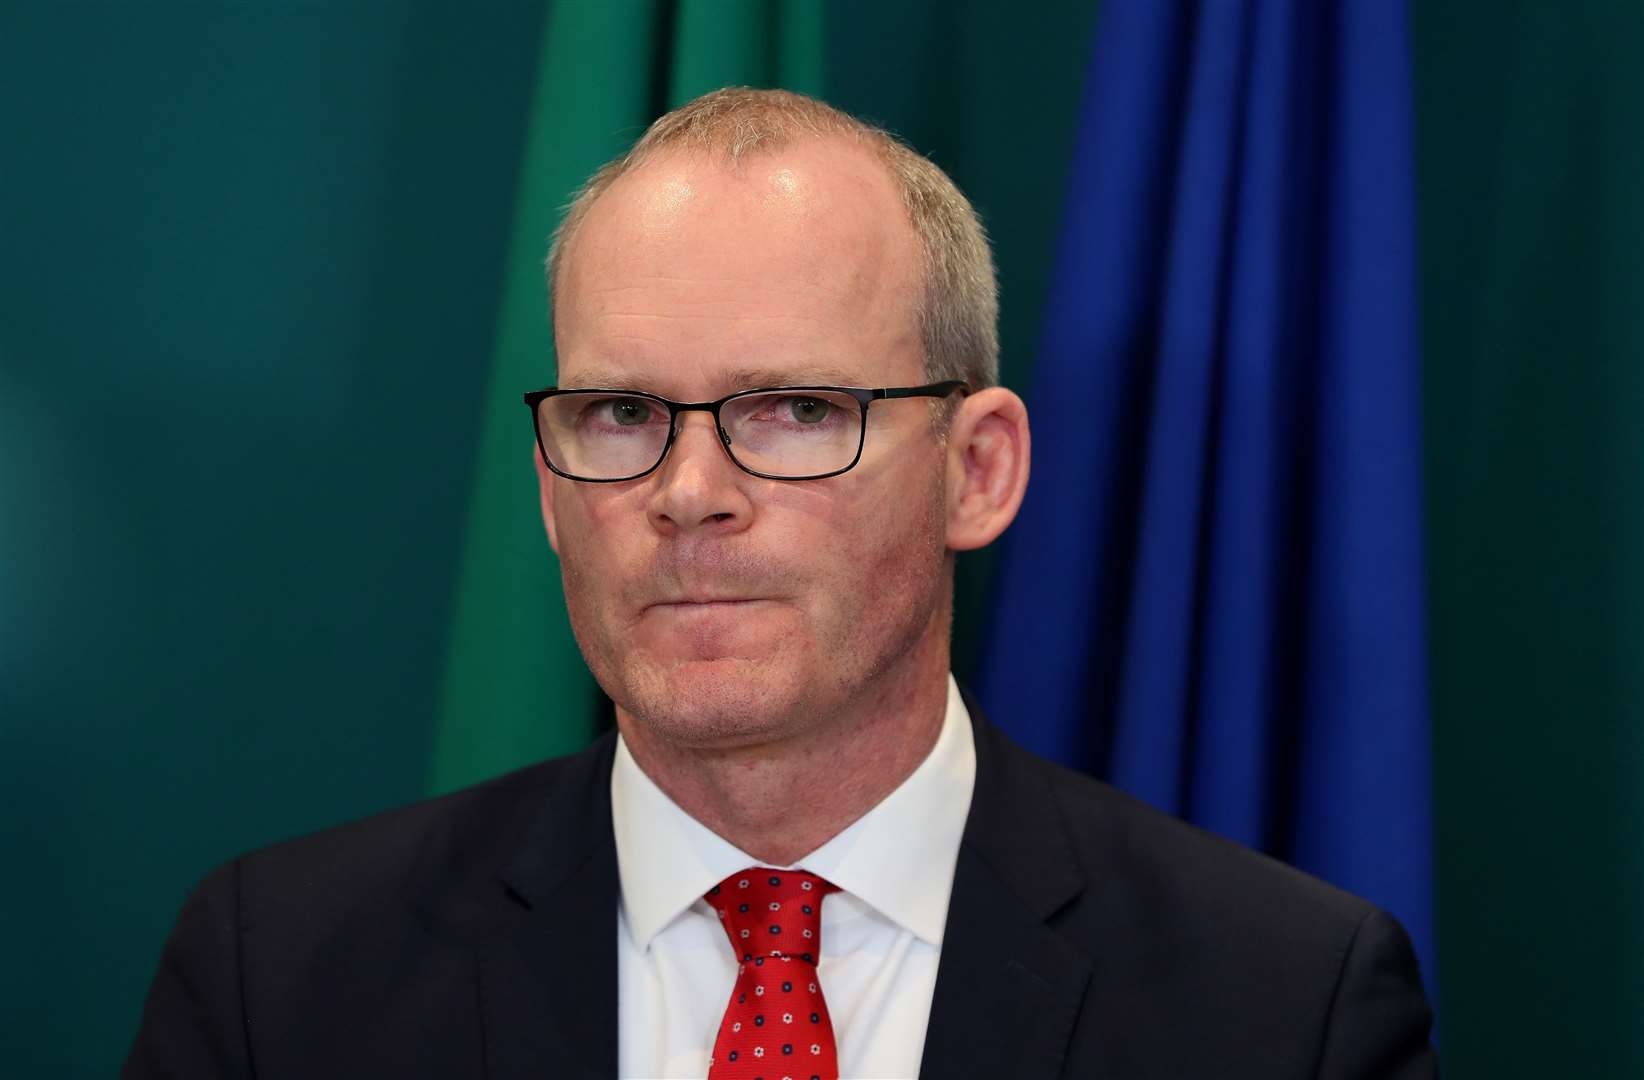 Simon Coveney said the EU would be sceptical about the lack of plans for new customs infrastructure (Brian Lawless/PA)